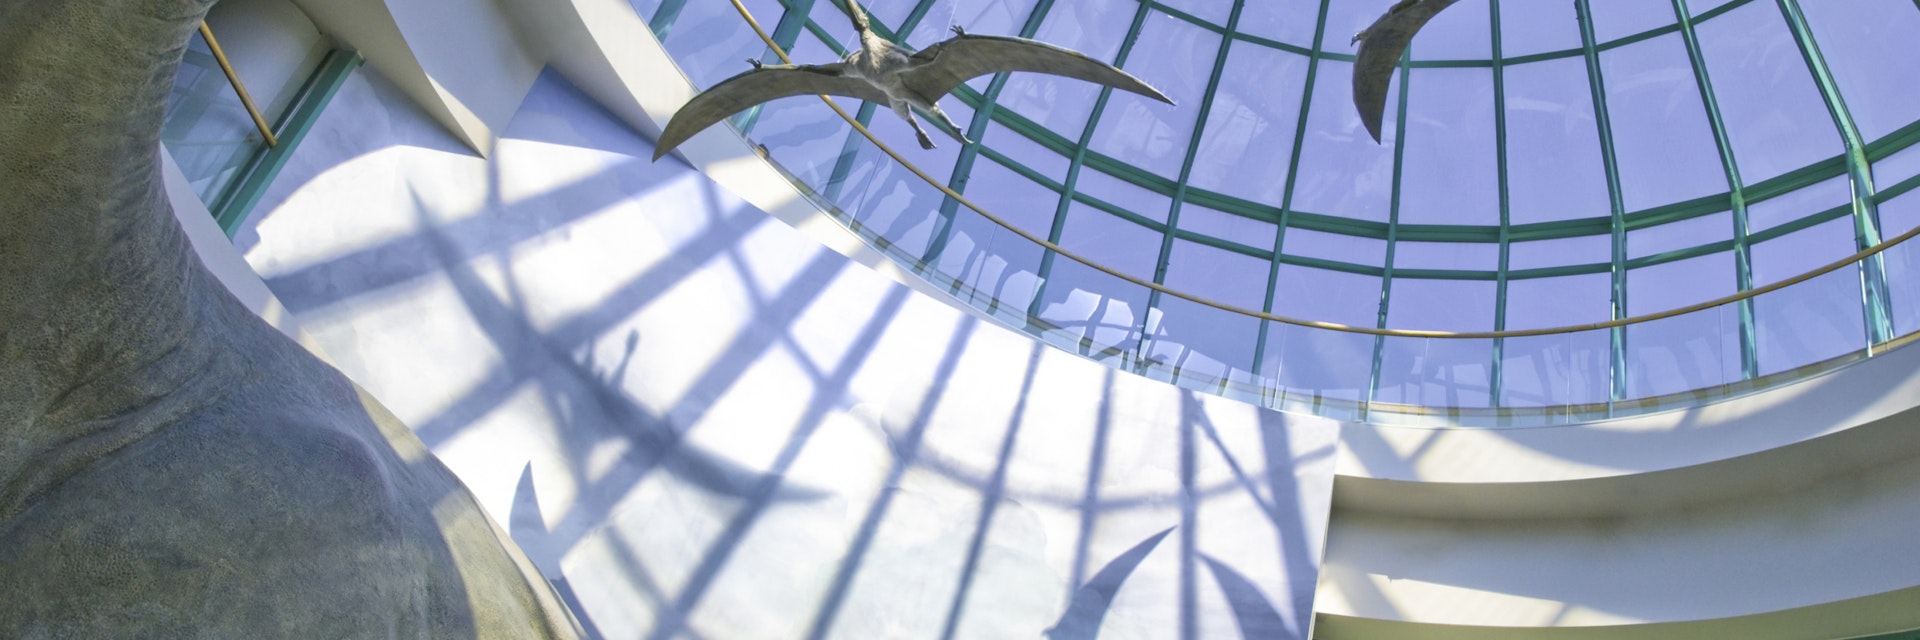 North Carolina Museum of Natural Sciences building's glass dome houses "Terror of the South" exhibit shows a gigantic Pleurocoelus  circled by winged Pterosaurs- (a state museum with no fees is the most visited attraction in the state) - Raleigh, North Carolina